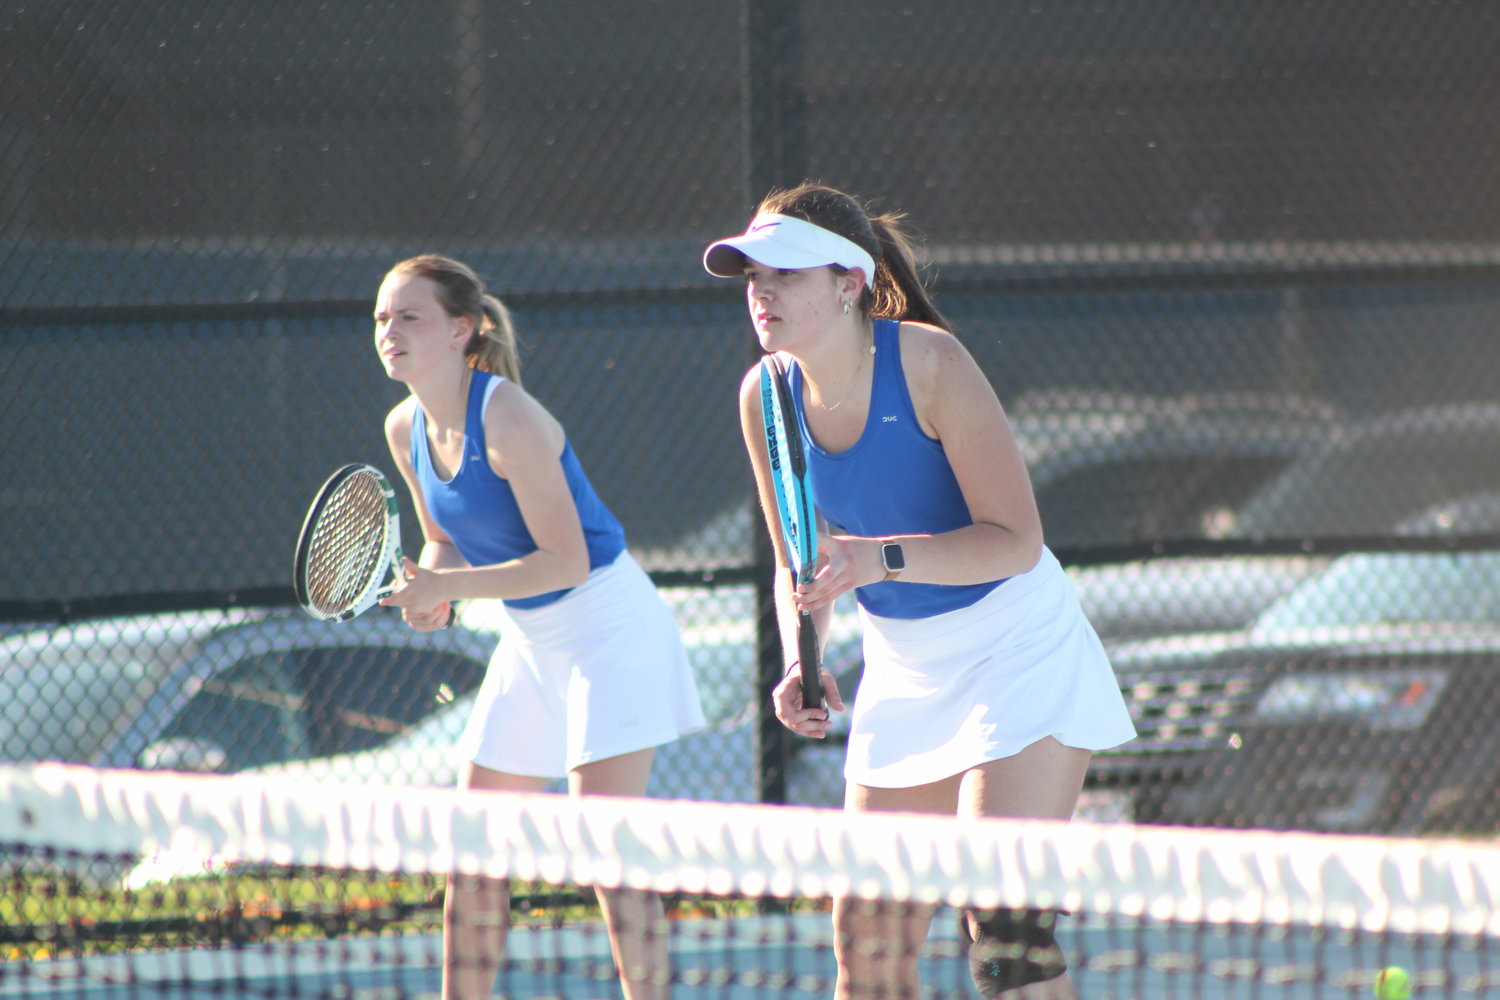 The two doubles team of Alaina Hall and Ali Brown were victorious at two doubles.